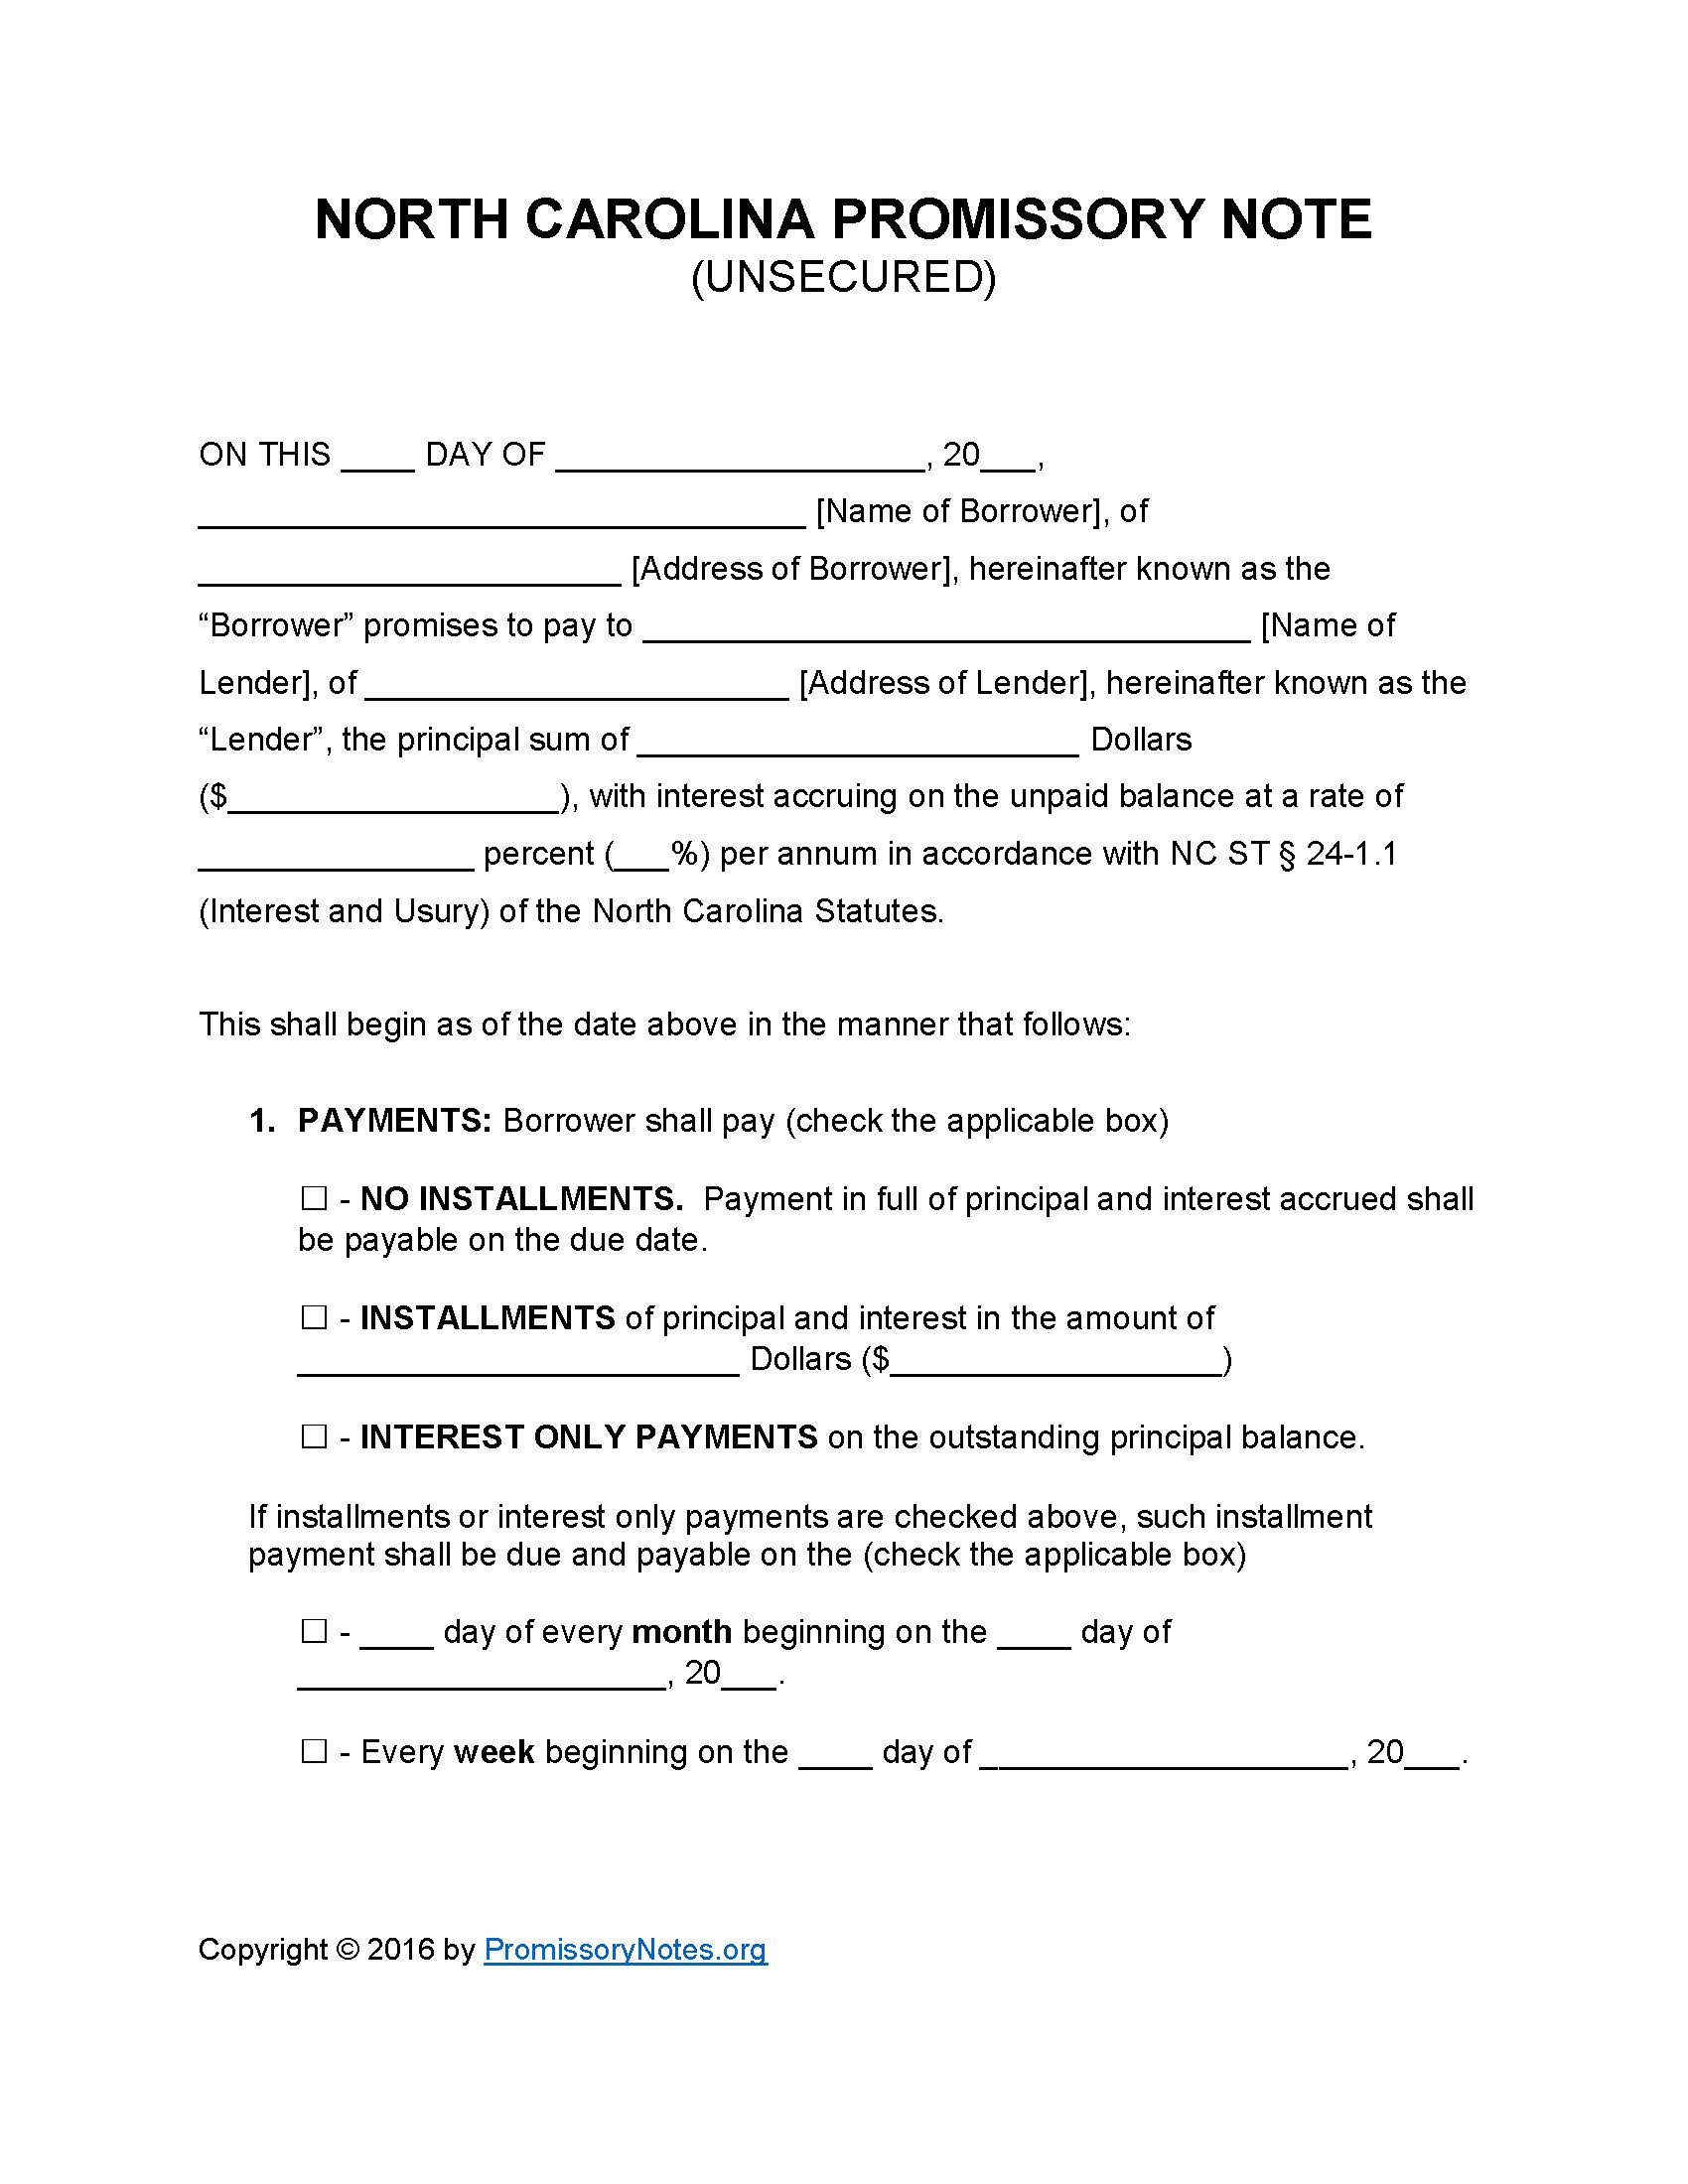 north-carolina-unsecured-promissory-note-form